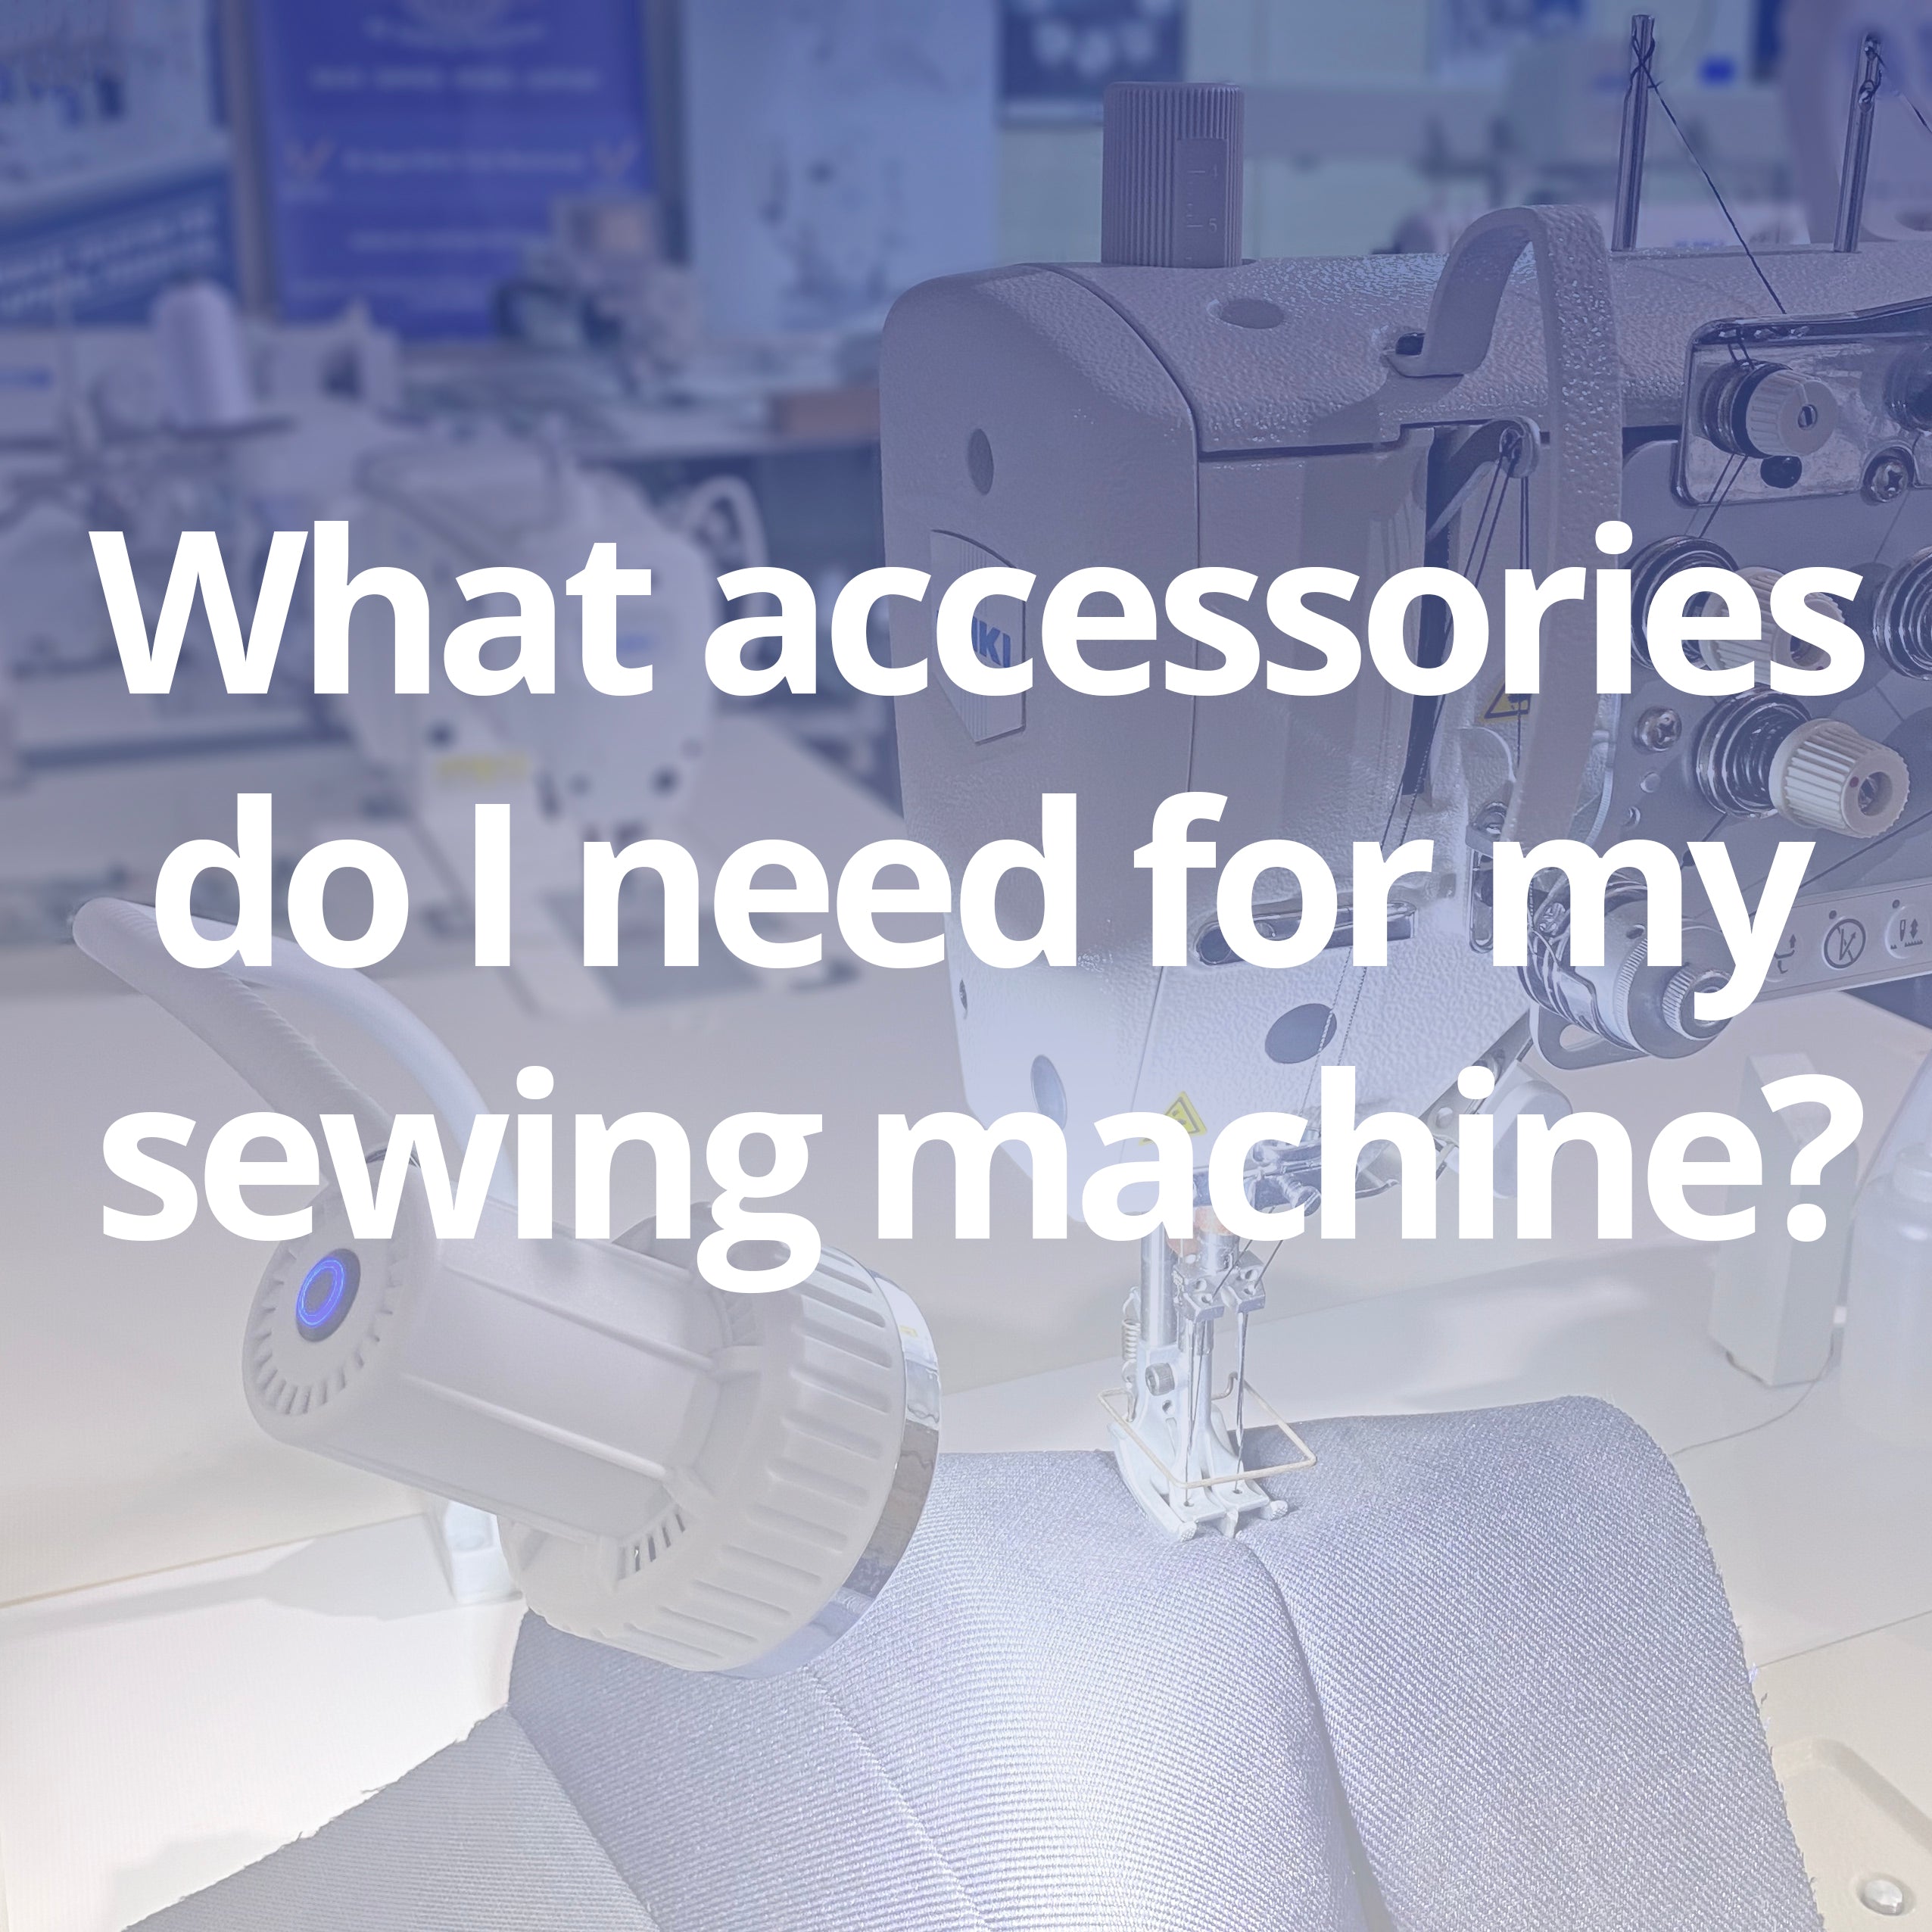 What accessories do I need for my sewing machine?